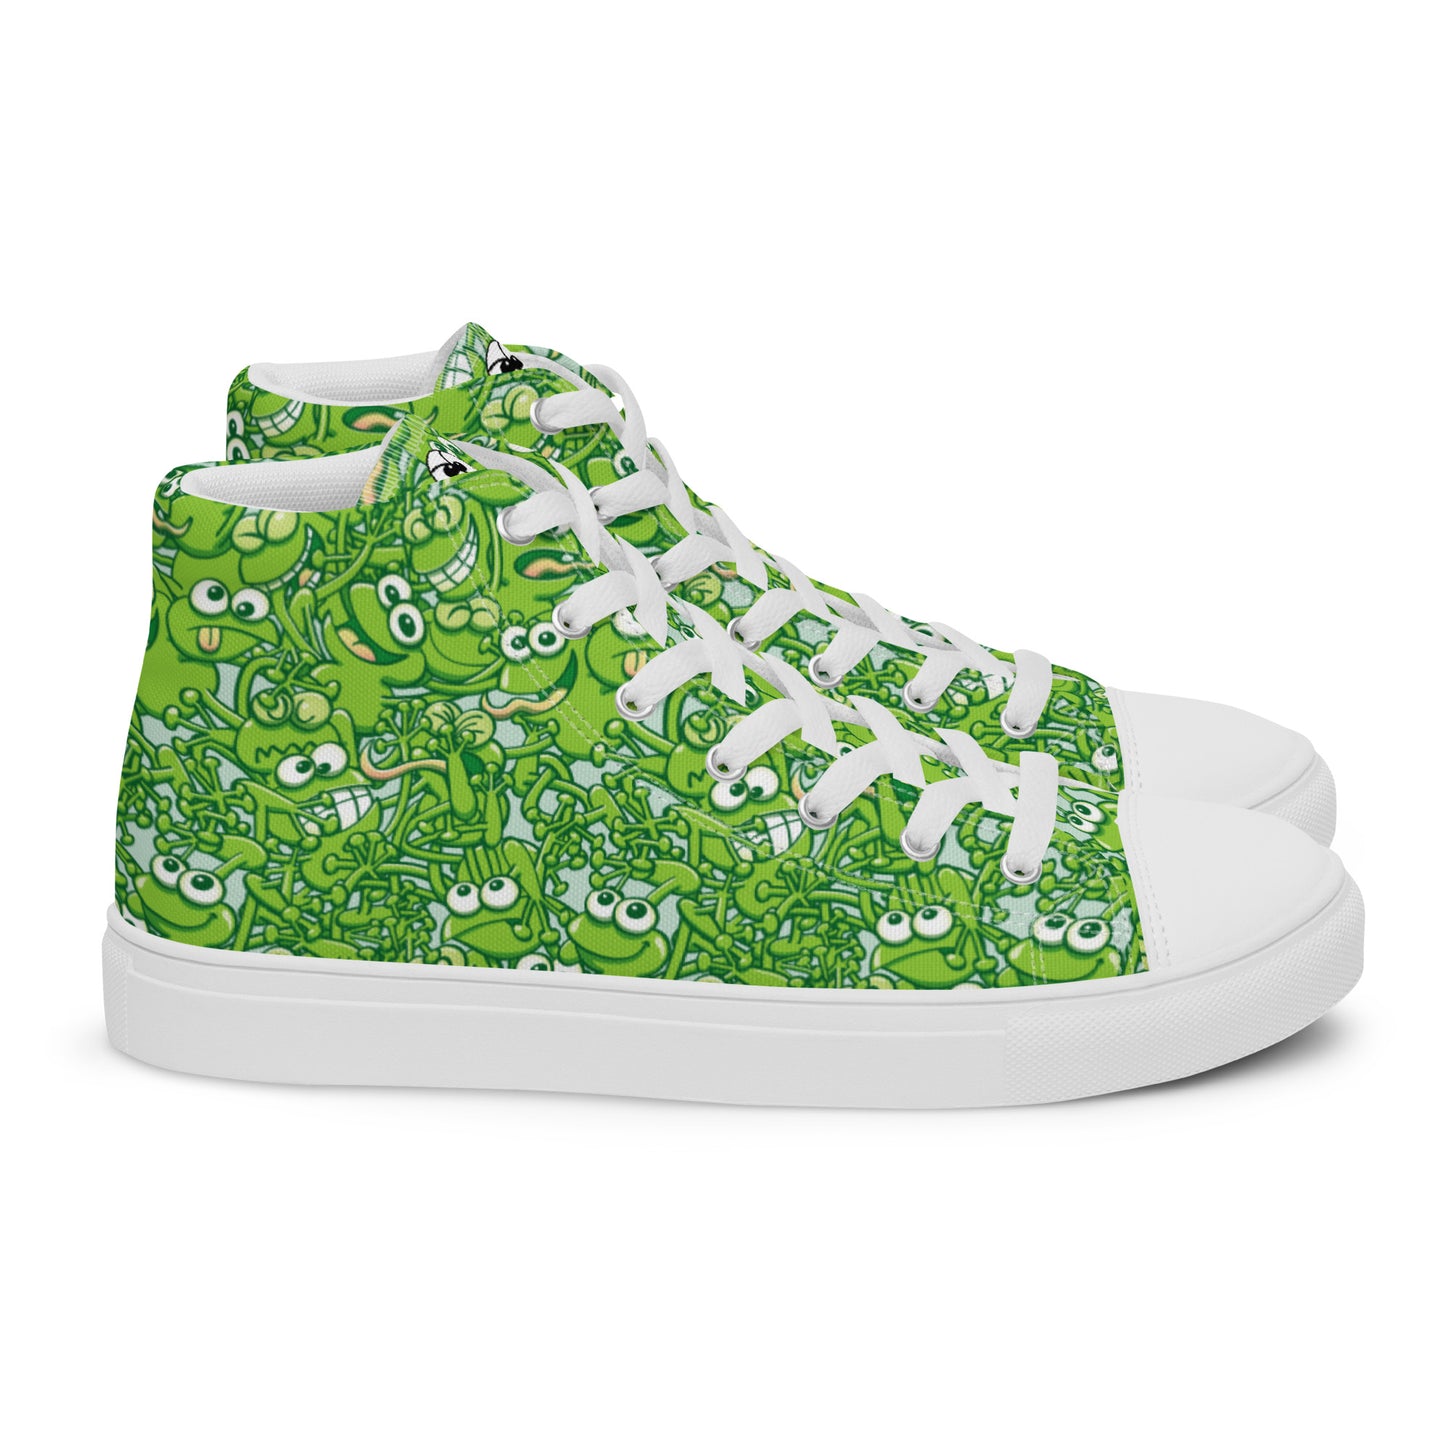 A tangled army of happy green frogs appears when the rain stops Women’s high top canvas shoes. Side view